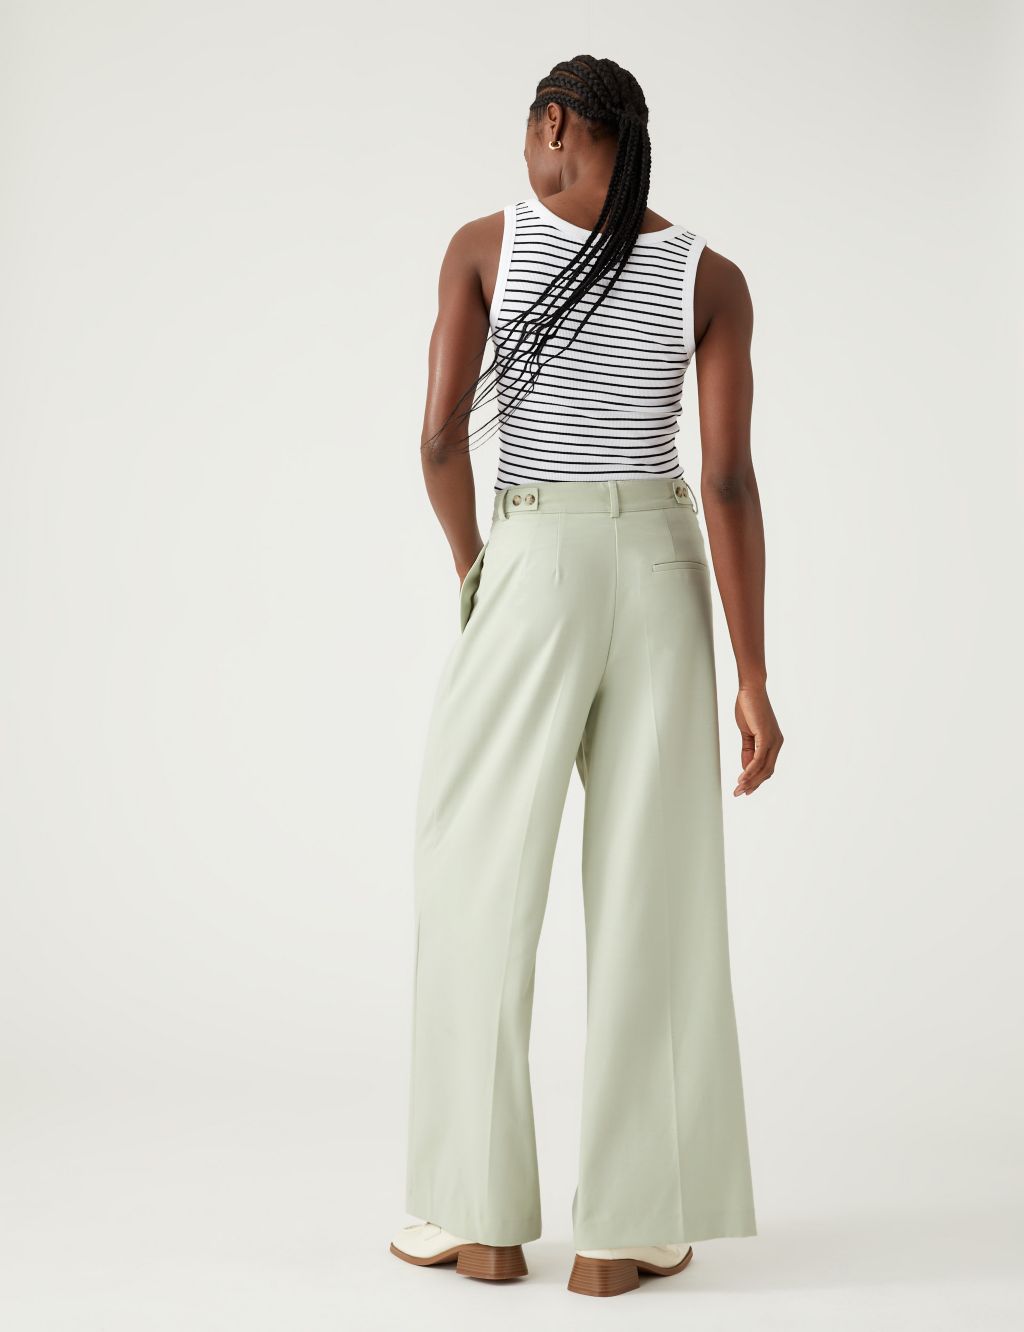 Marl Pleat Front Wide Leg Trousers image 5